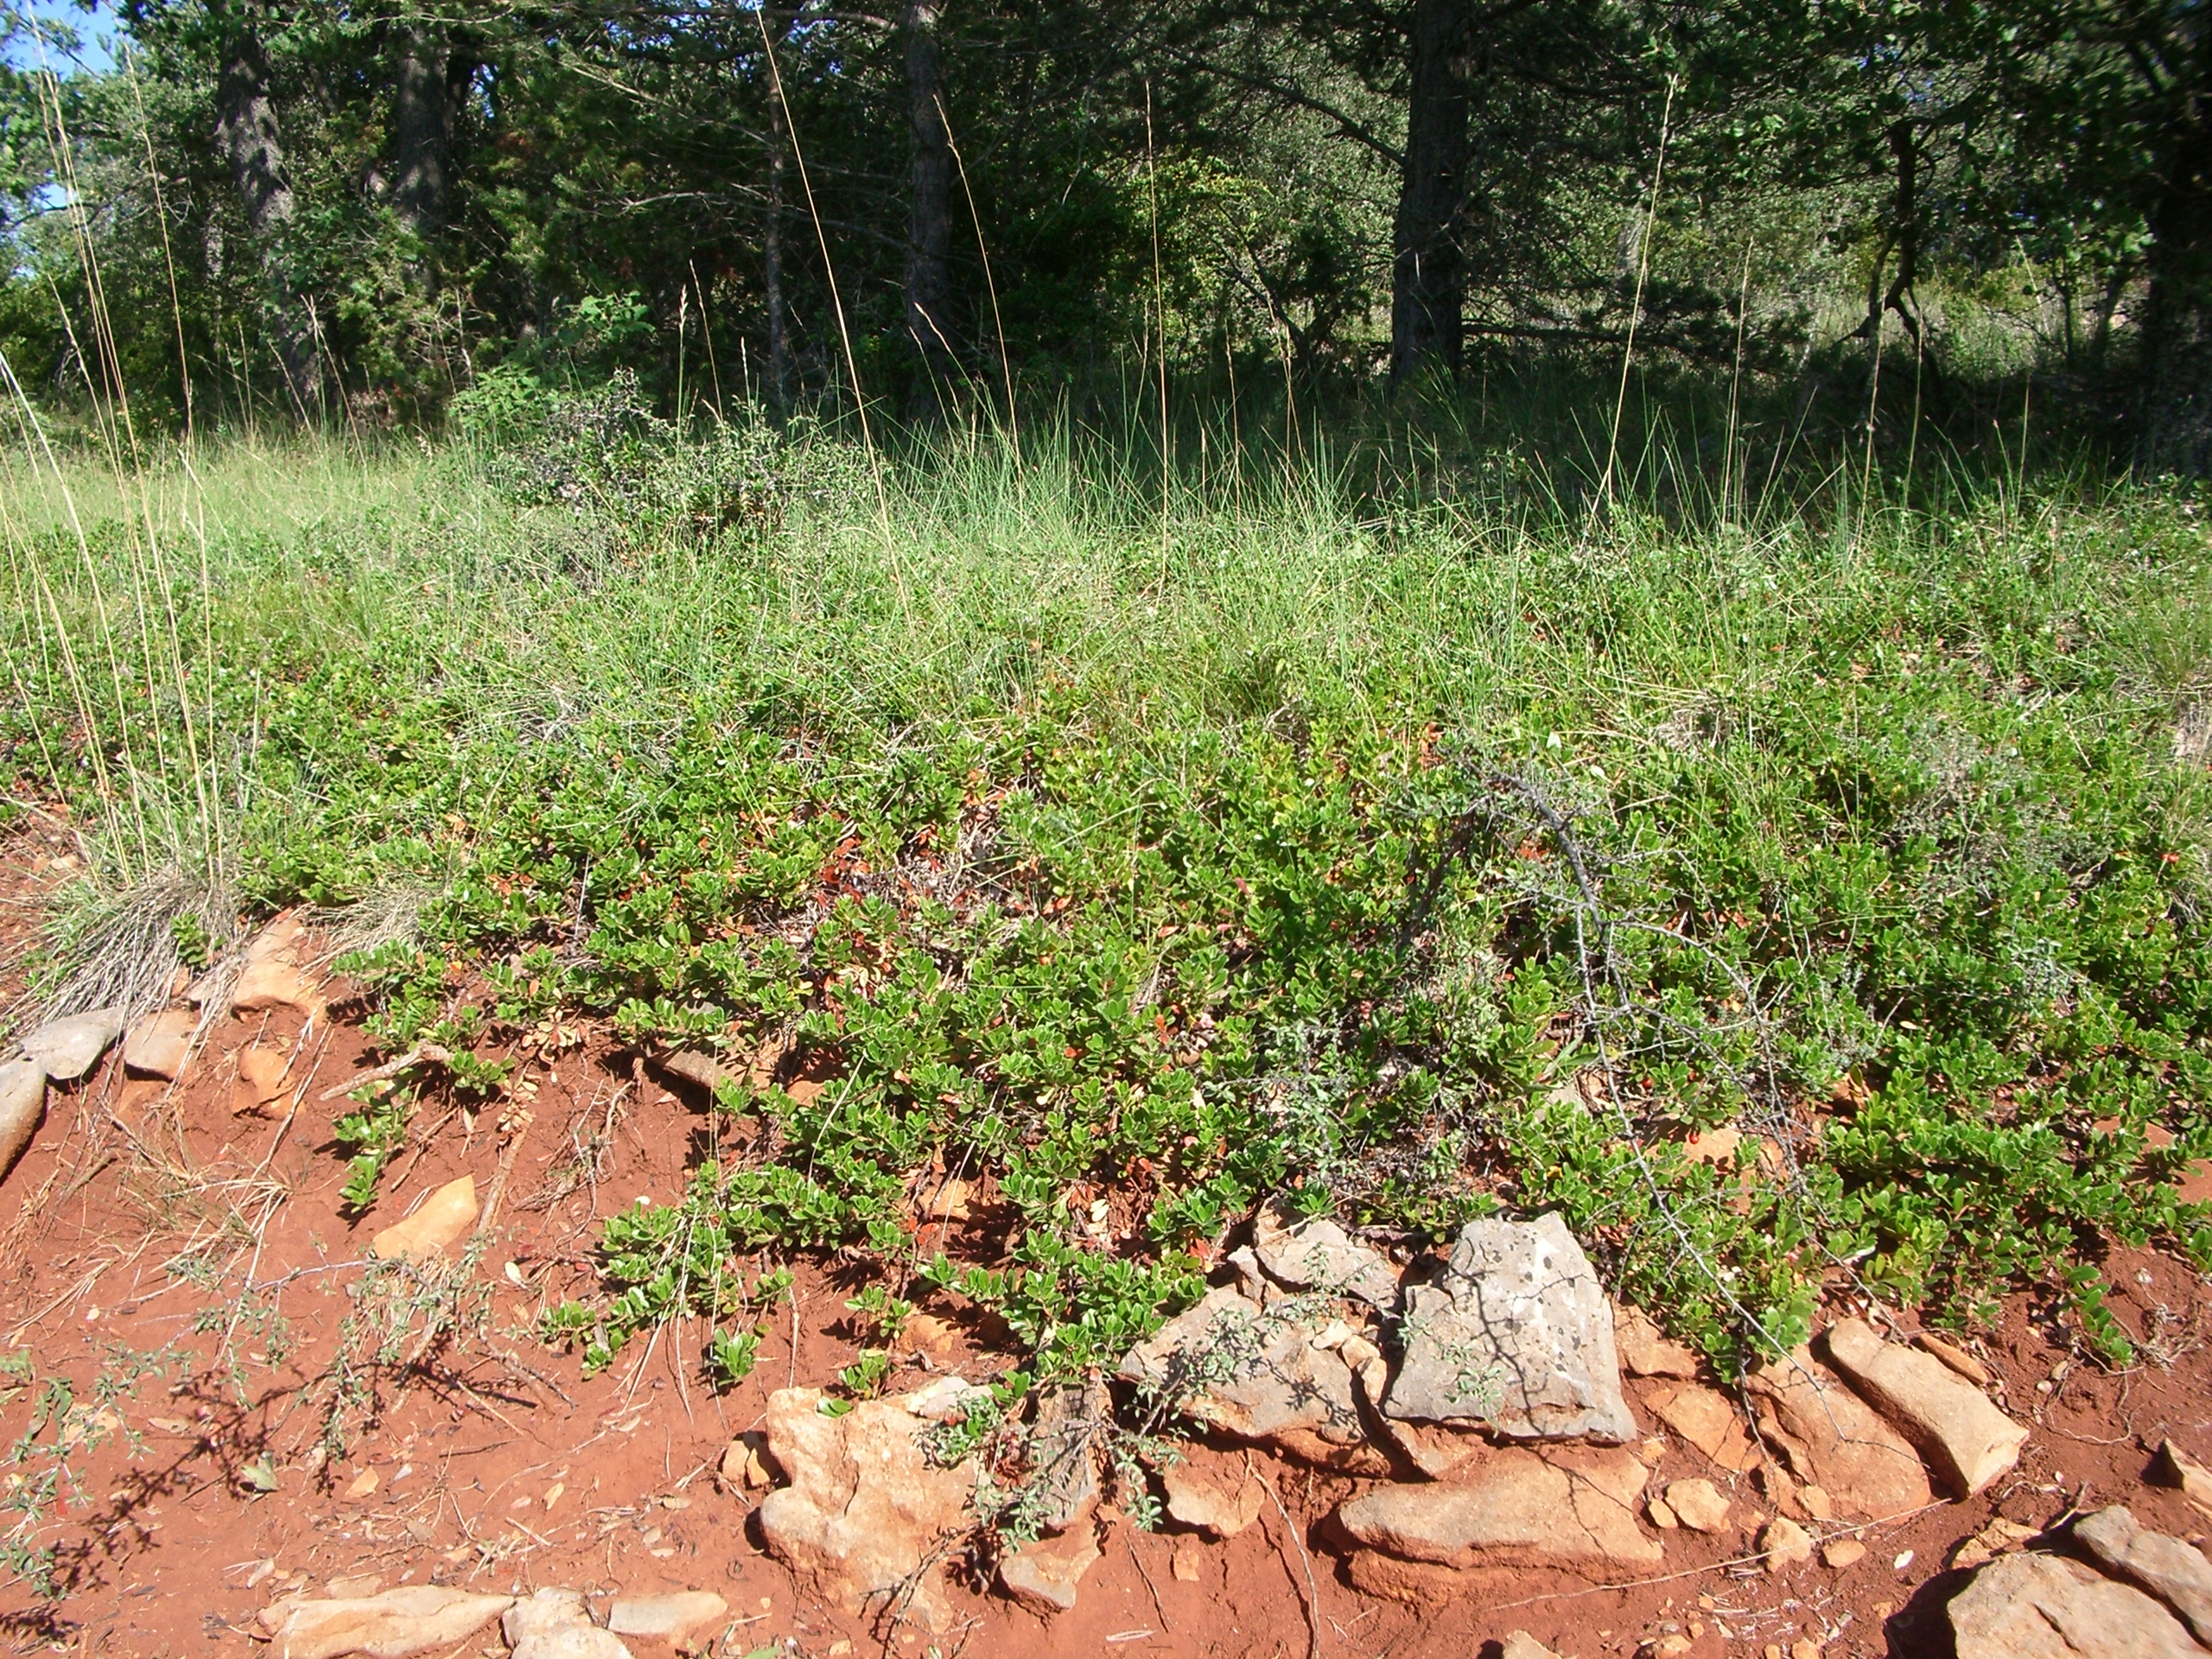 Arctostaphylos uva-ursi groundcover to protect the soil from erosion. Source: GPAM-CTFC